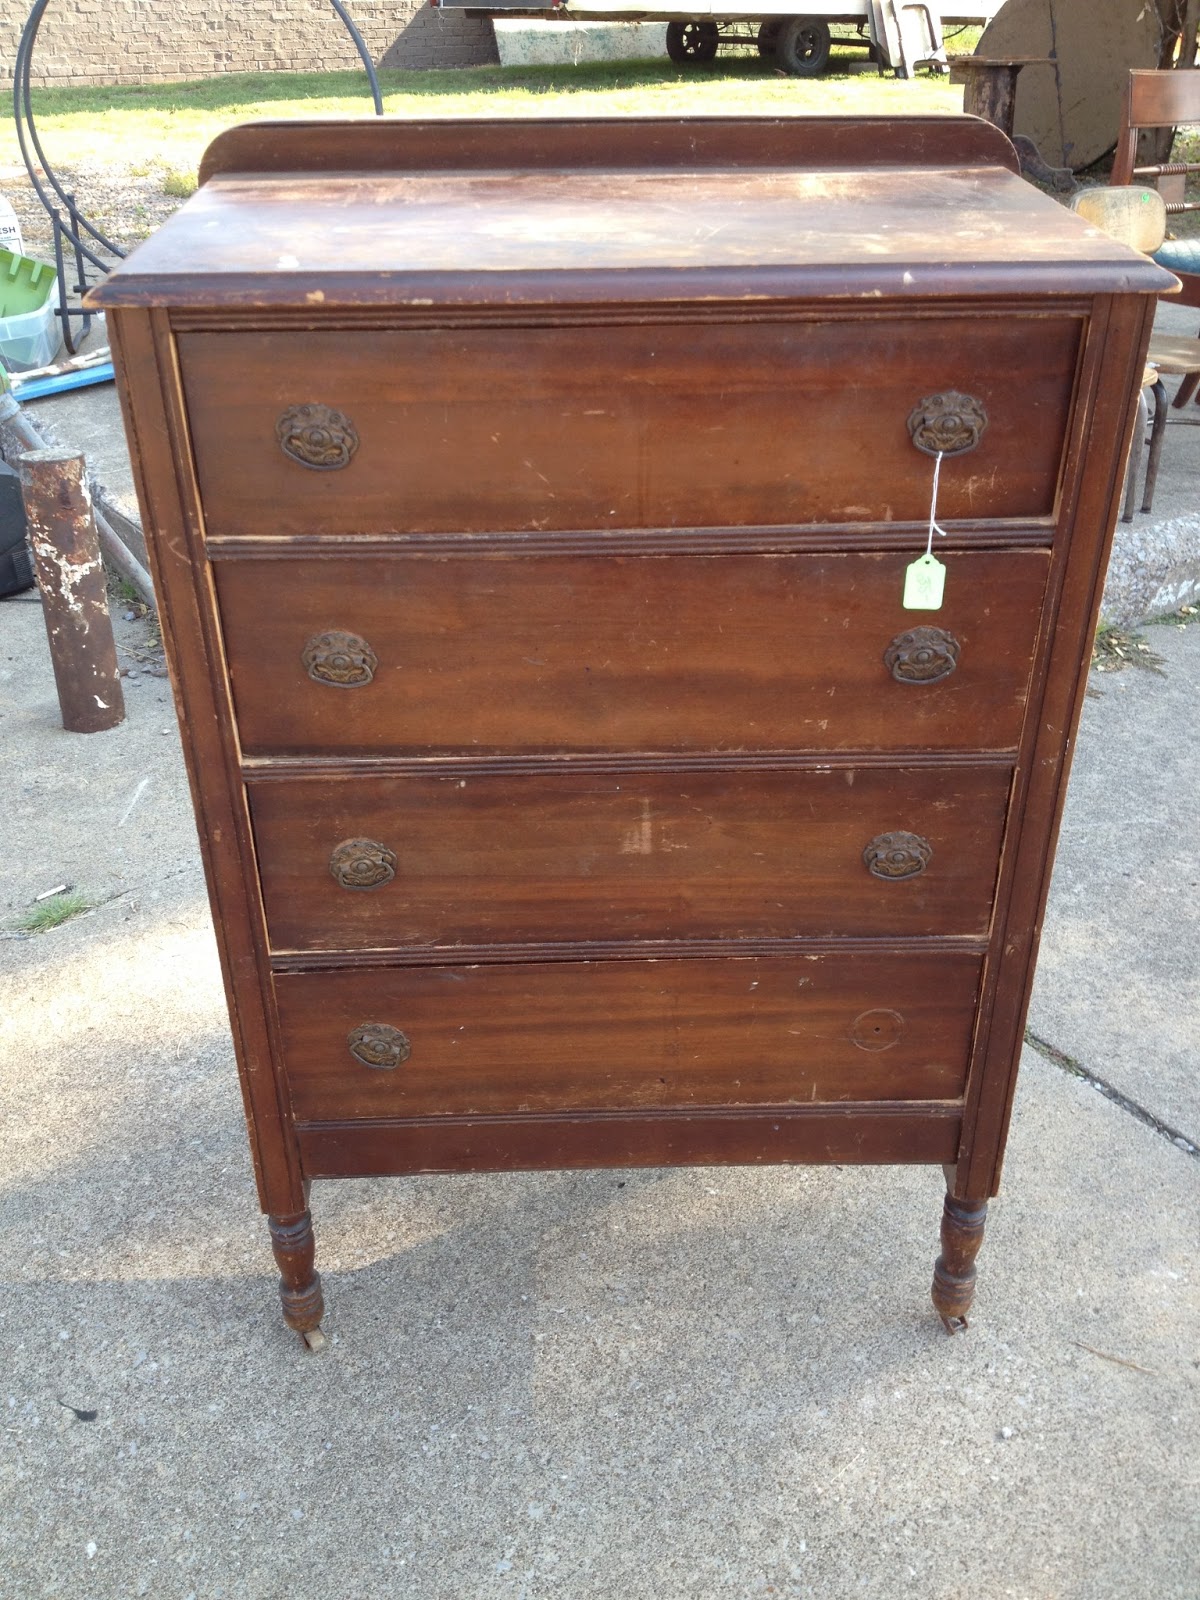 The Painted Chest Antique Highboy Dresser Before And After